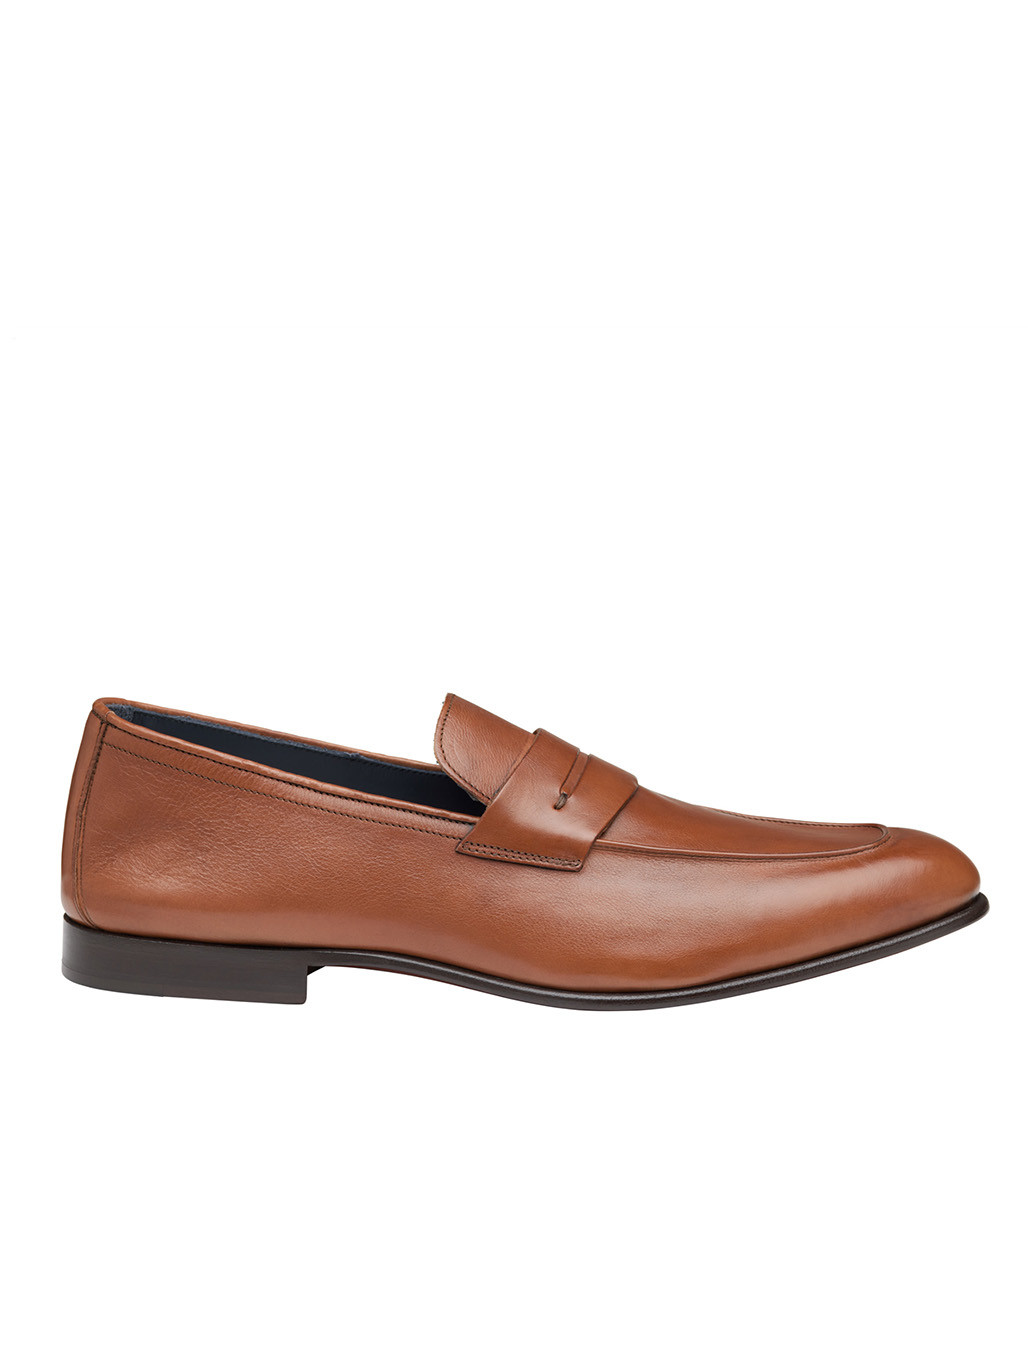 Taylor Penny Loafer Johnston & Murphy Collection